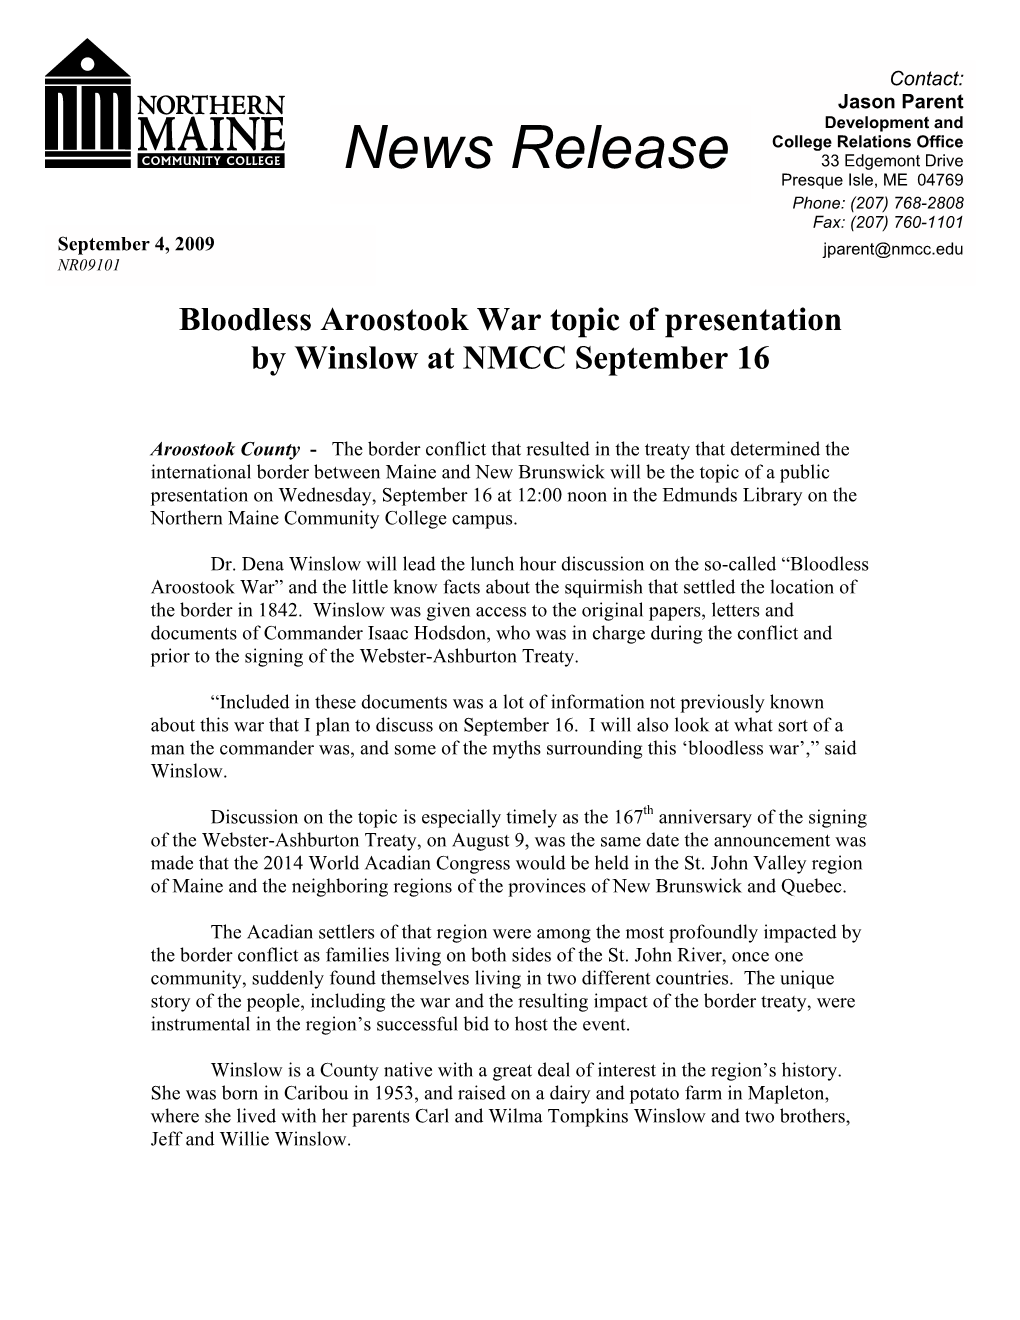 Bloodless Aroostook War Topic of Presentation by Winslow at NMCC September 16